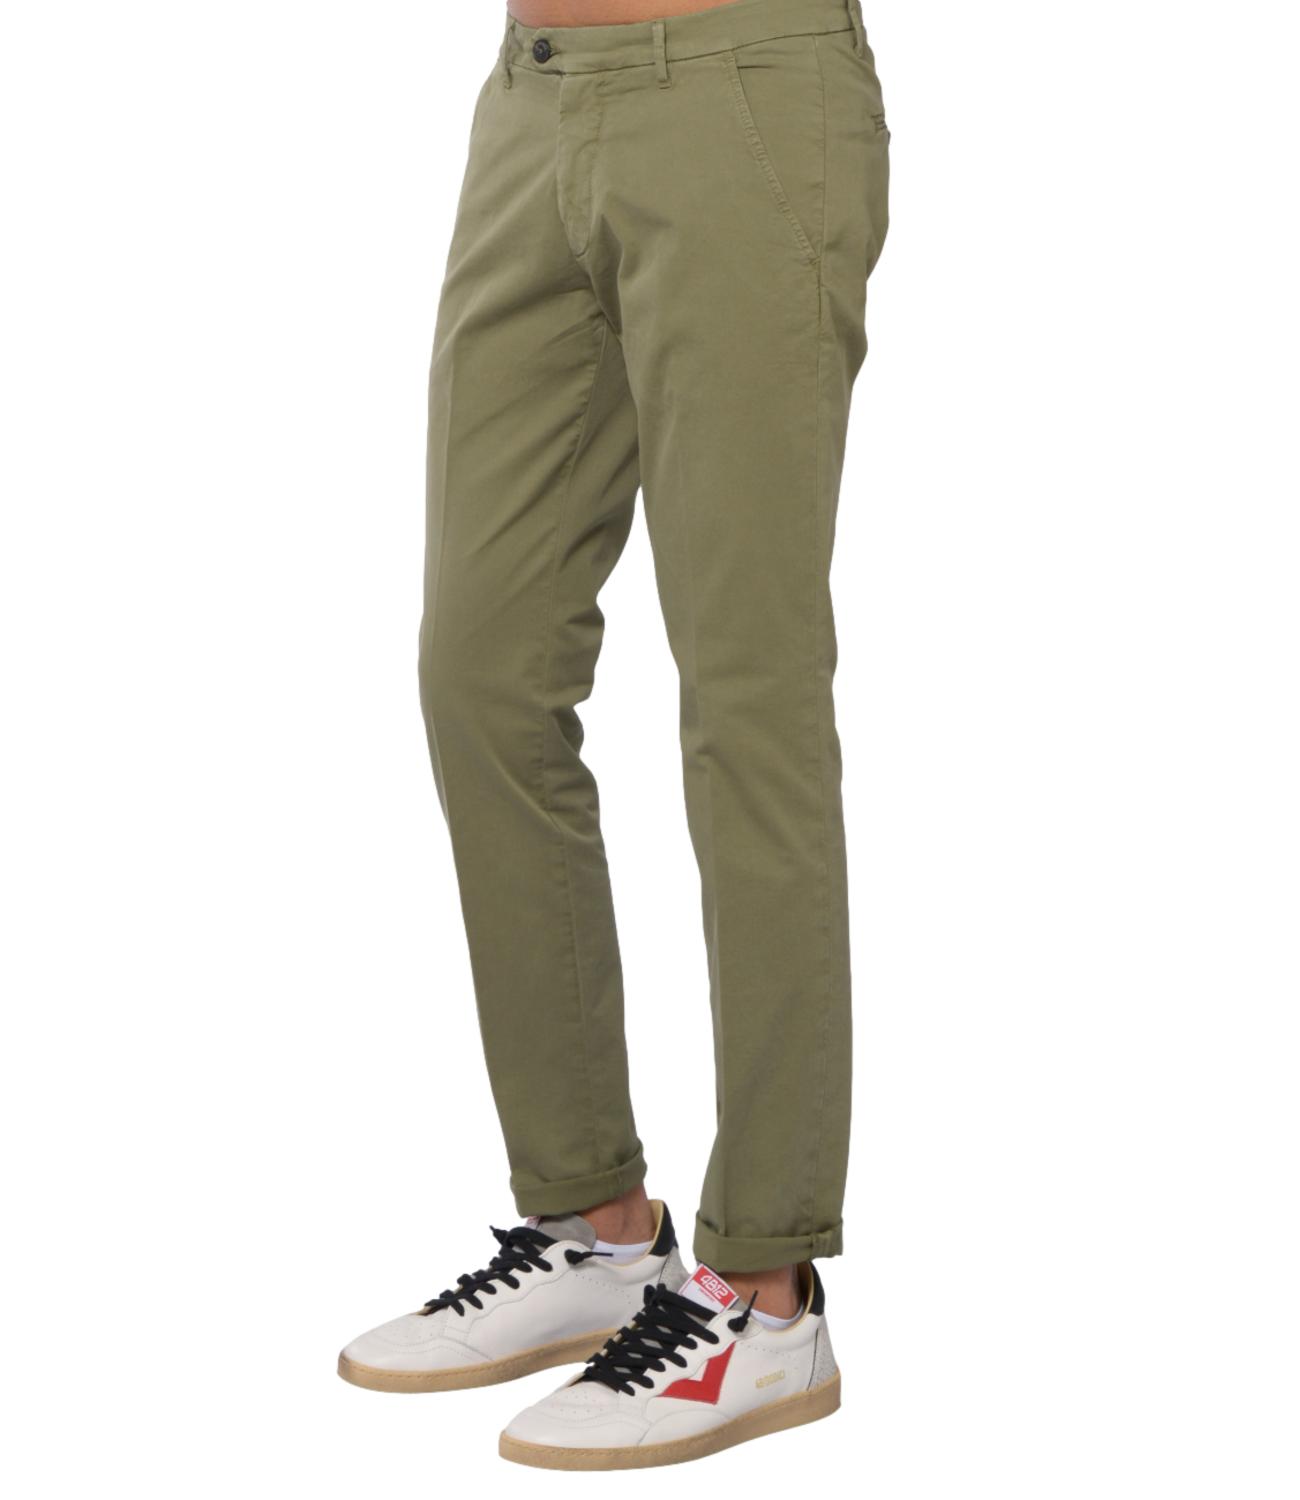 Roy roger's pantalone New Rolf colore verde olive